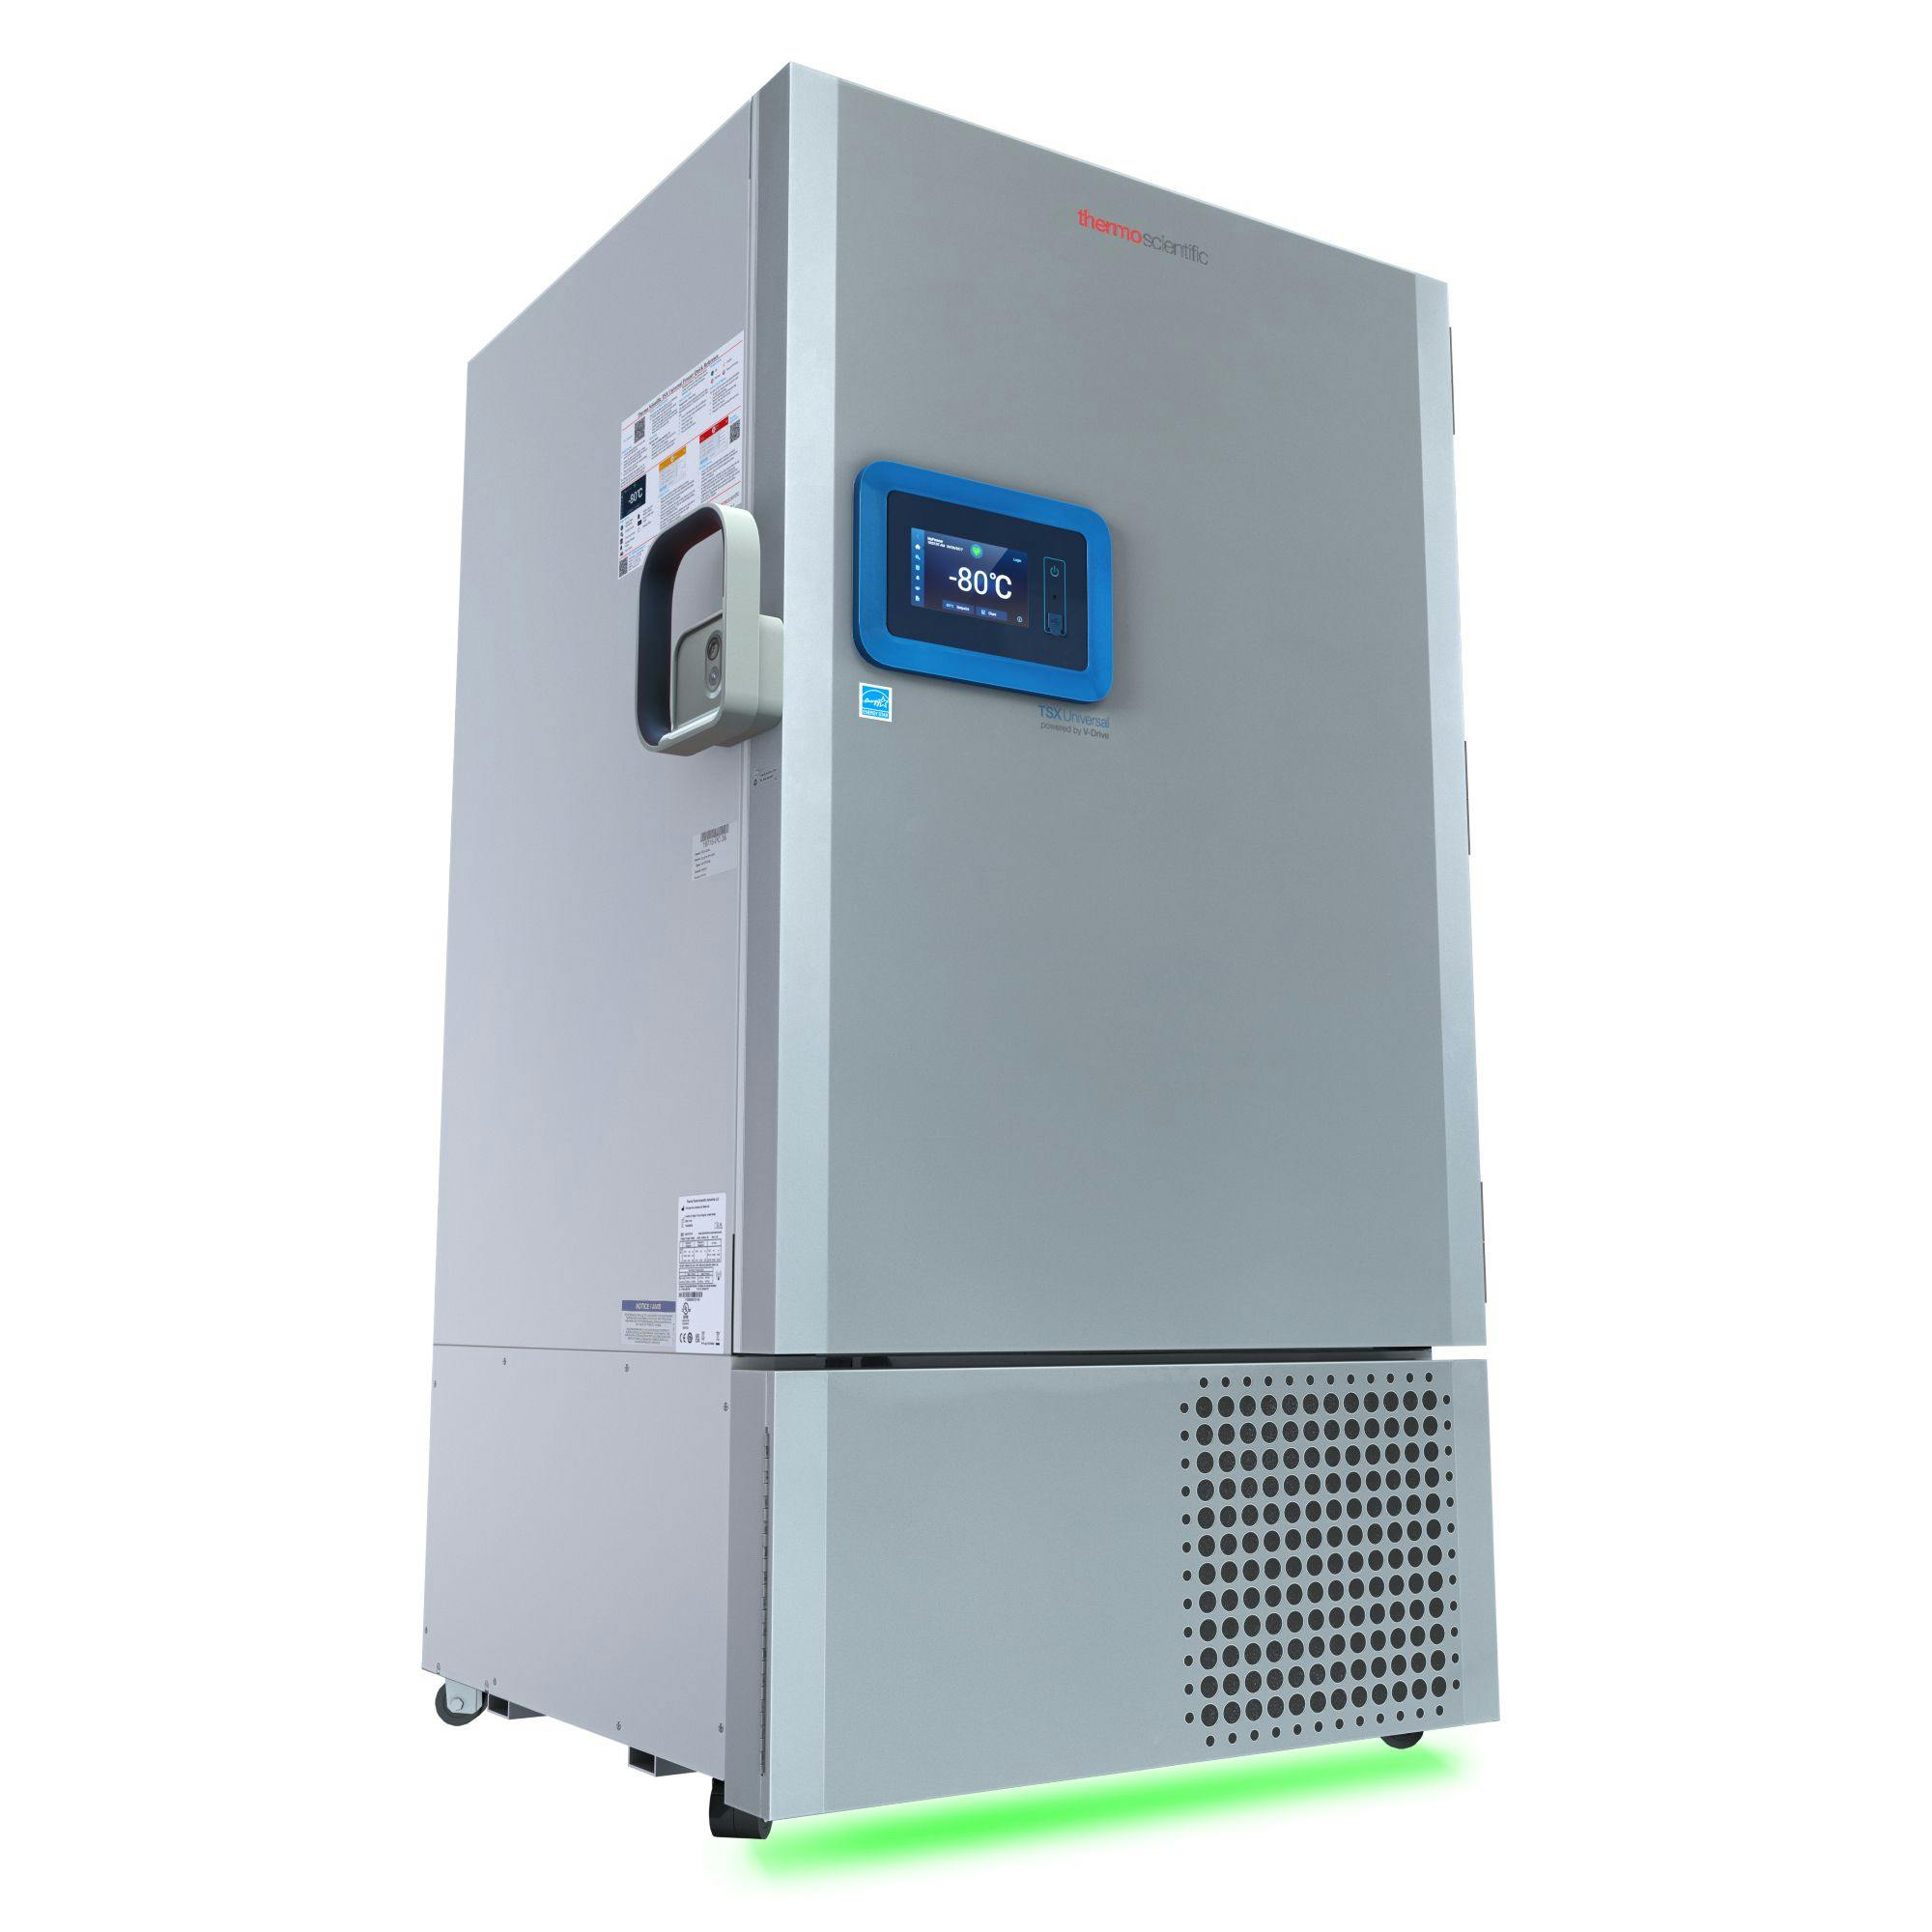 The TSX Universal Series ULT Freezer. Image Credit: Thermo Fisher Scientific